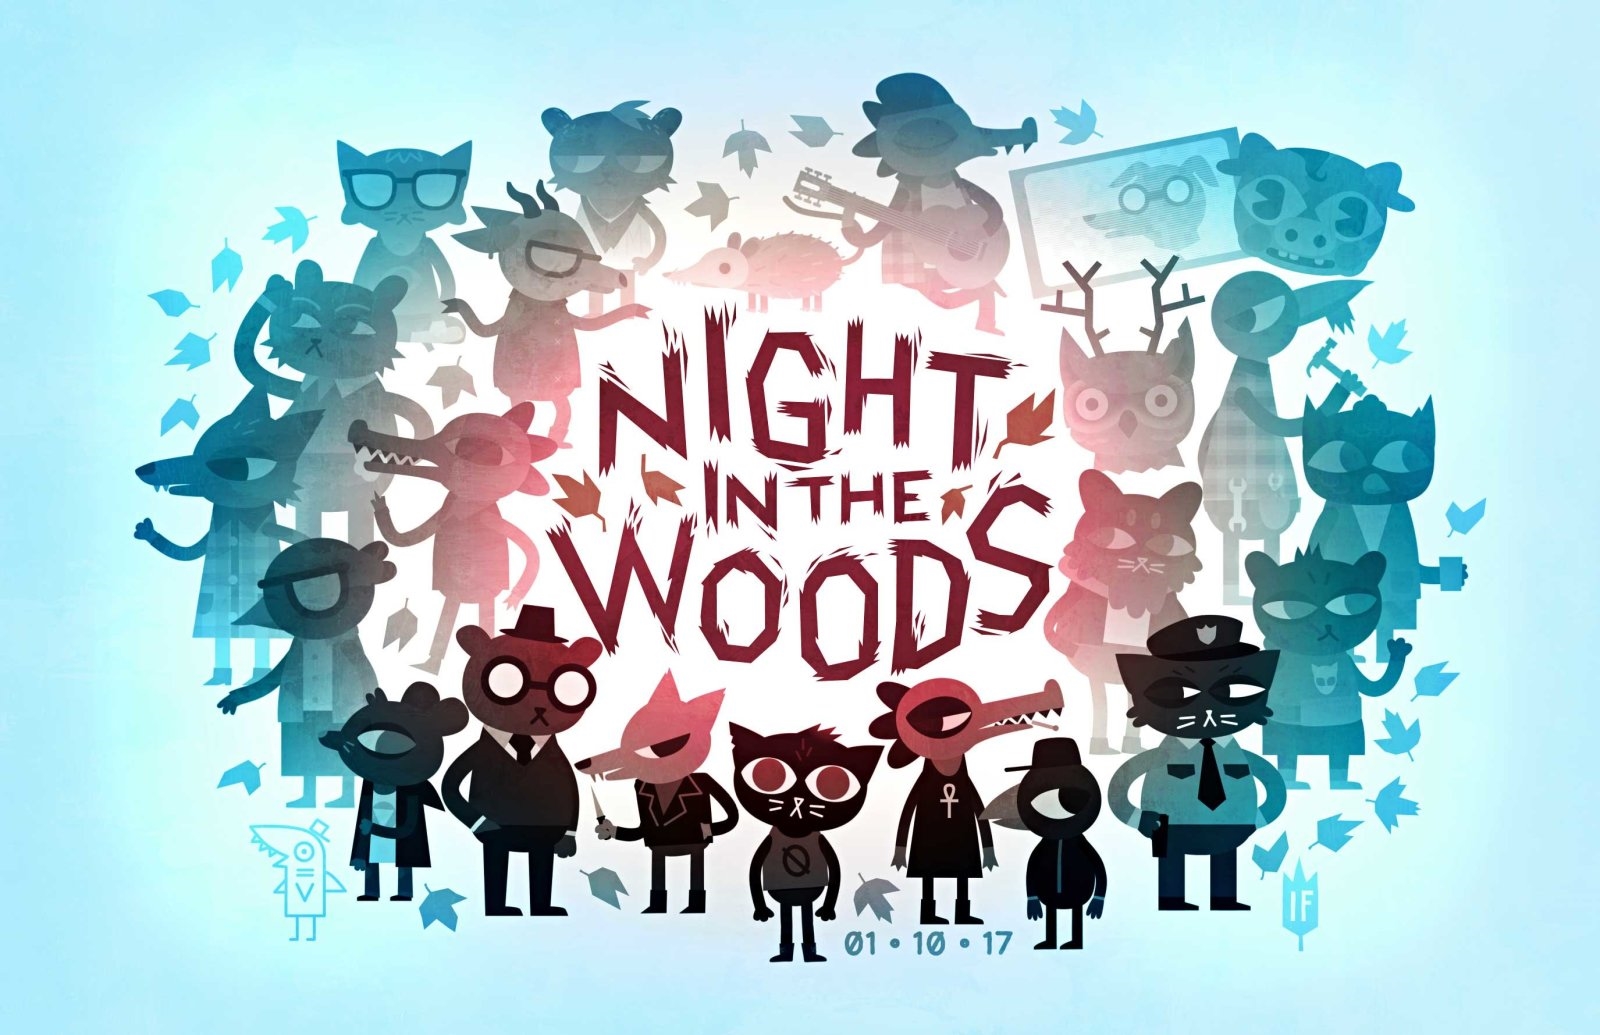 'Night in the Woods' studio cuts ties with co-founder Alec Holowka | DeviceDaily.com